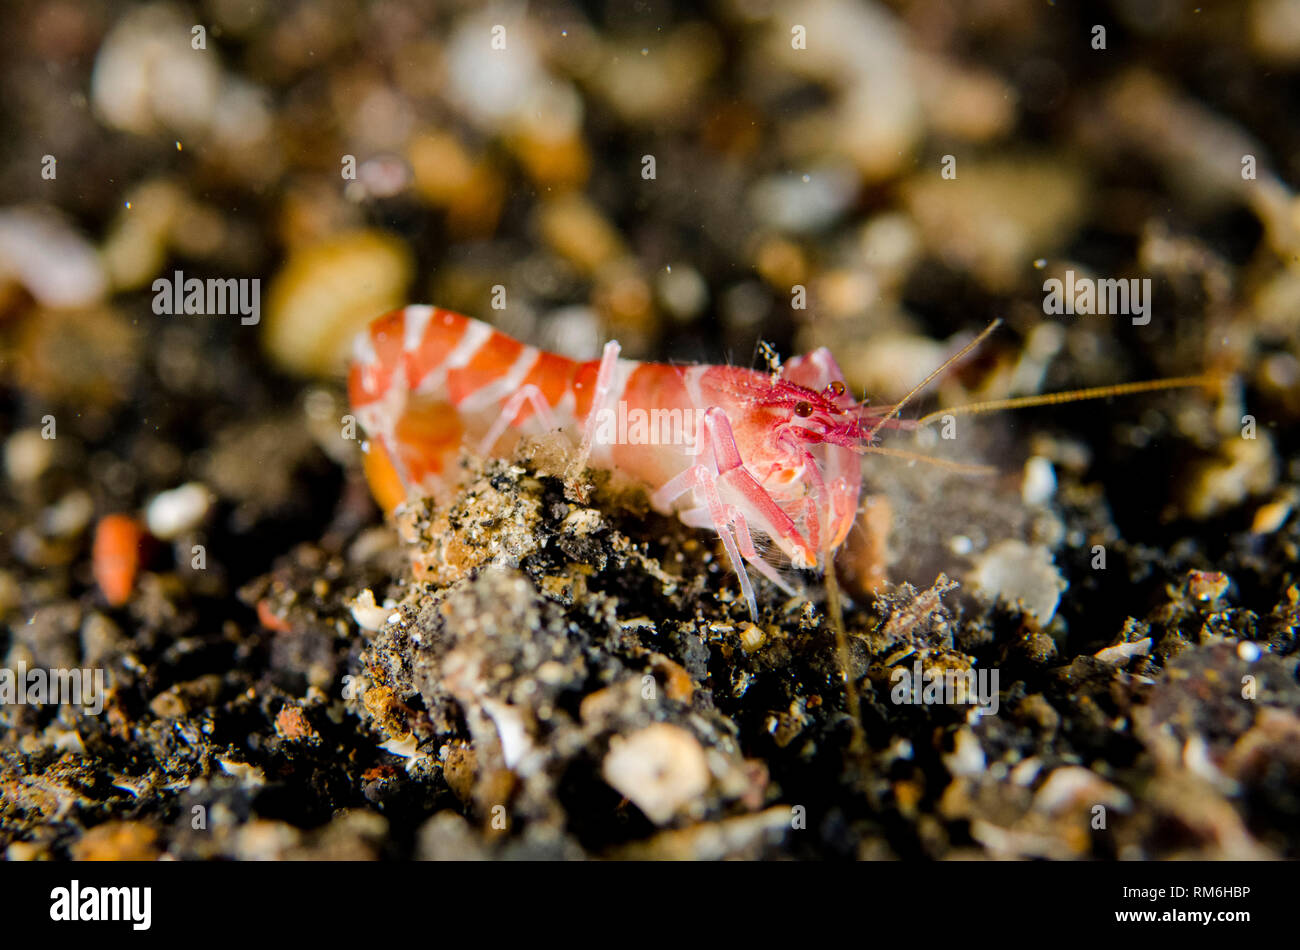 Snapping Shrimp, Athanas sp, on black sand, night dive, TK1 dive site, Lembeh Straits, Sulawesi, Indonesia Stock Photo